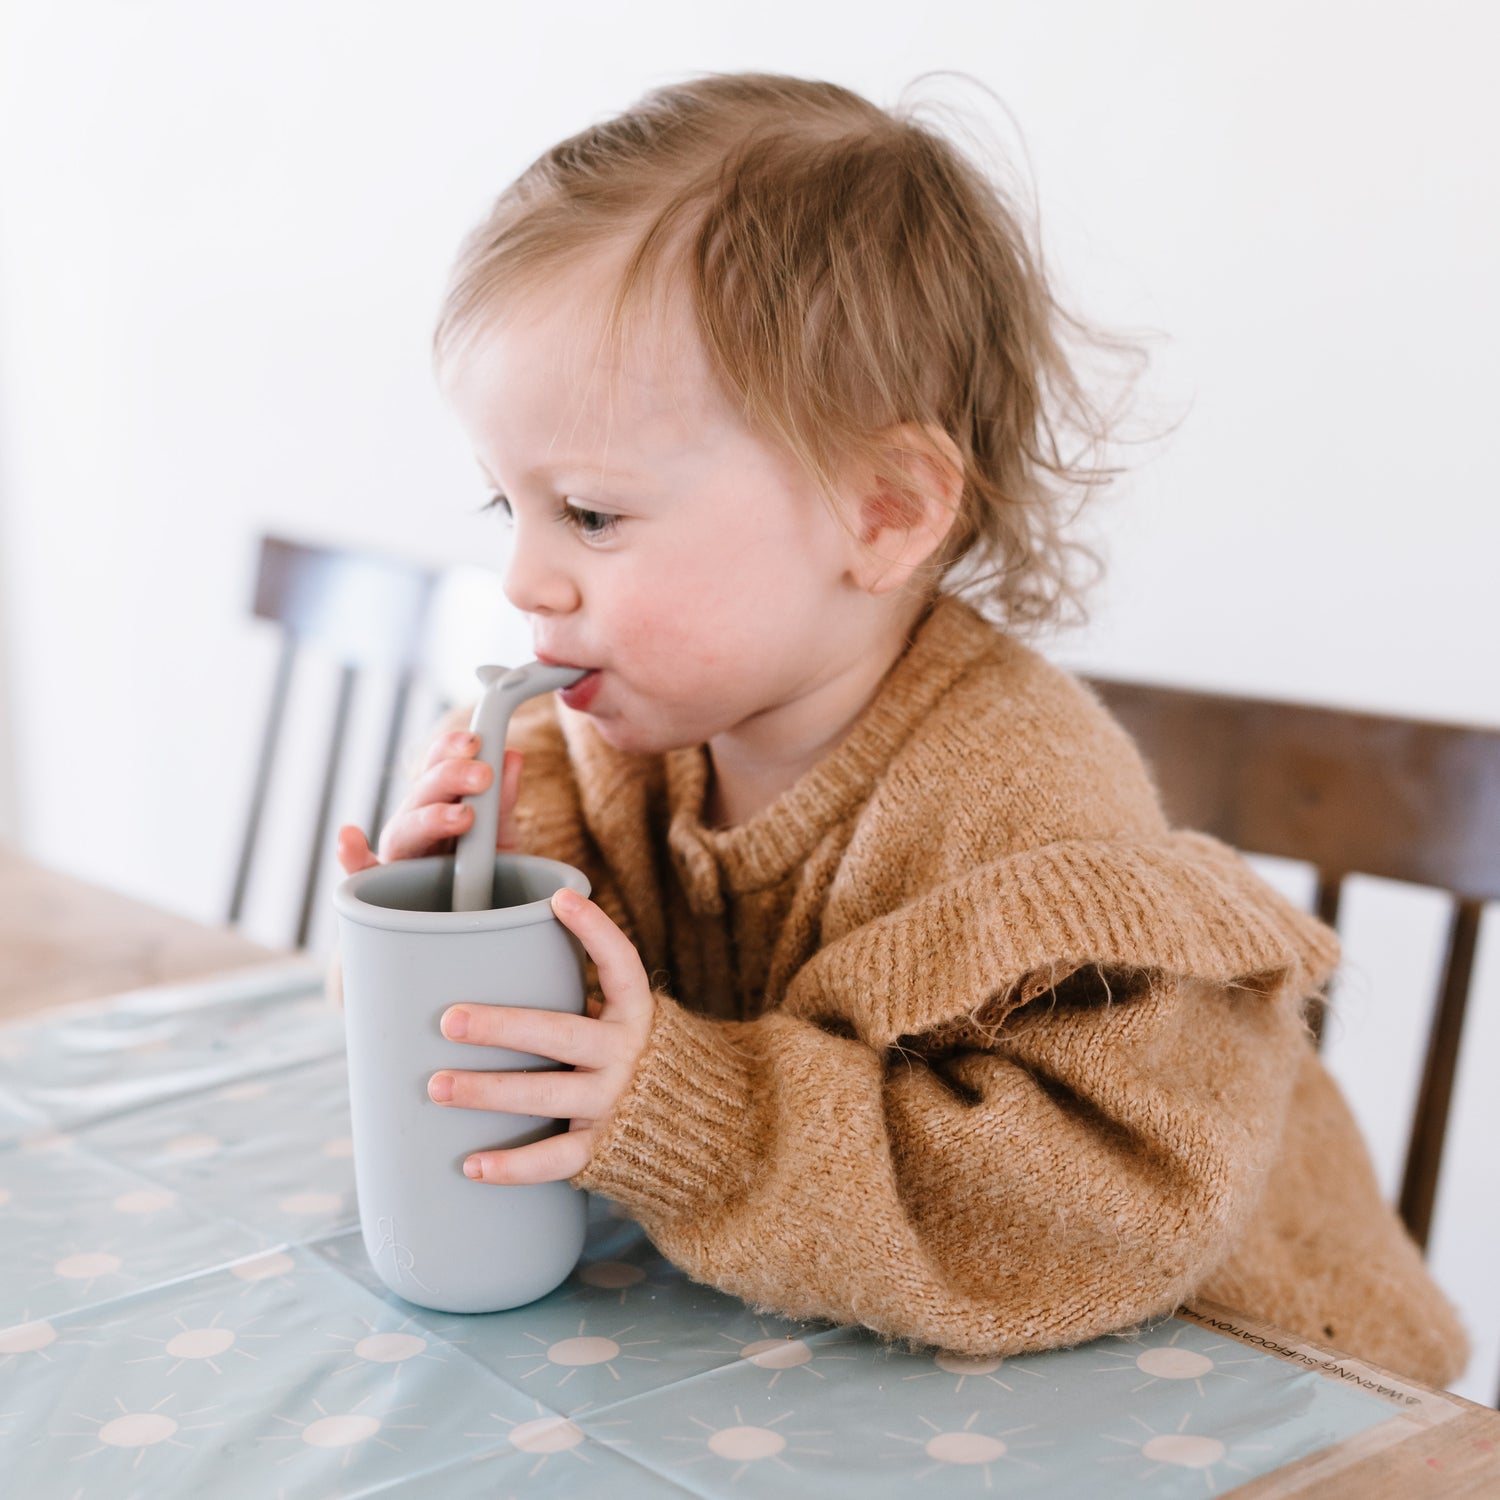 Toddler sitting at the table using the Cutie Cup and Shark Cutie Straw.